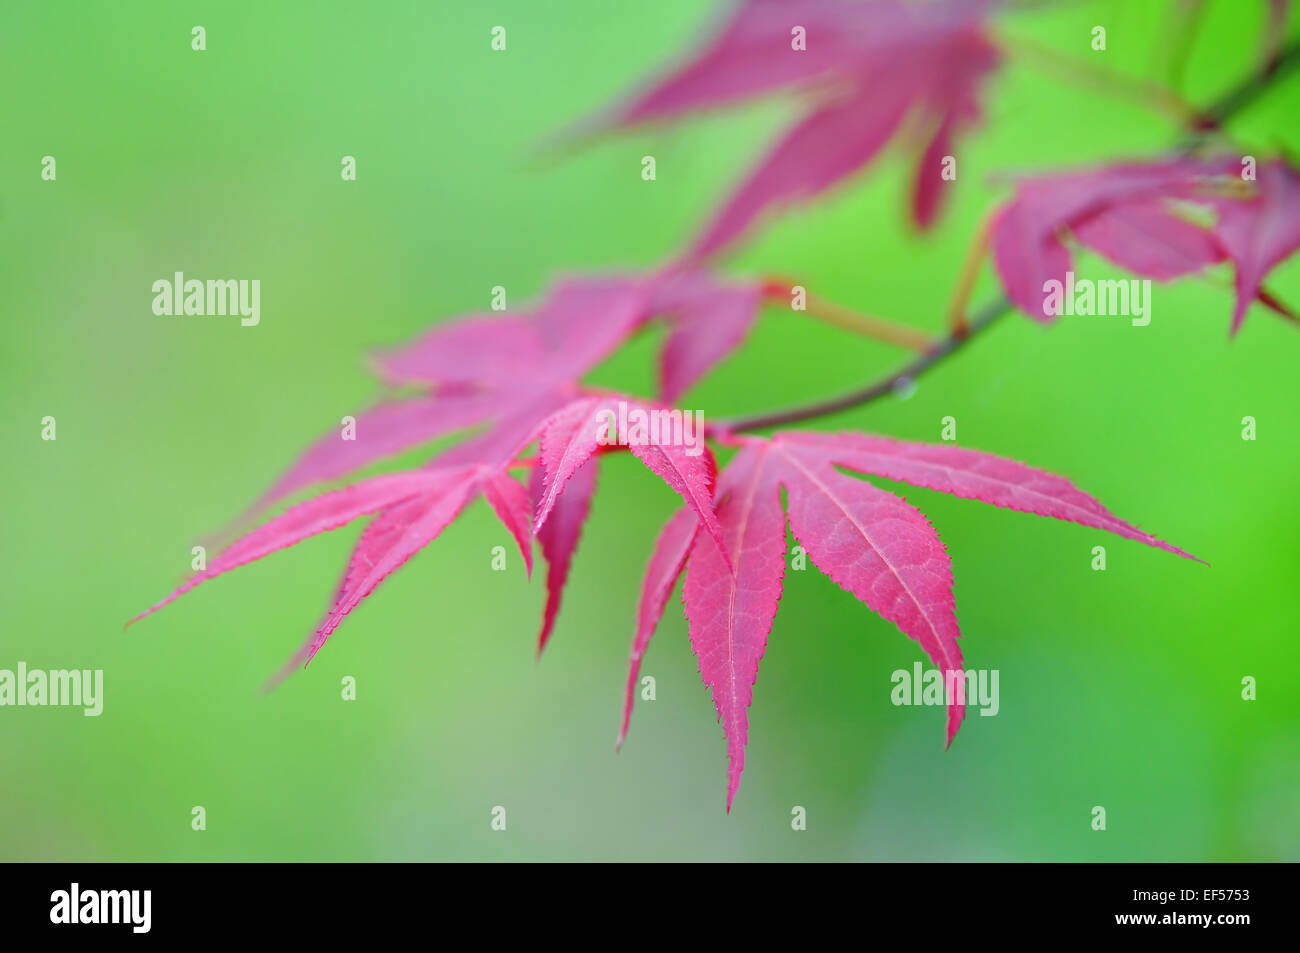 Nature background - purple leaves on green background Stock Photo